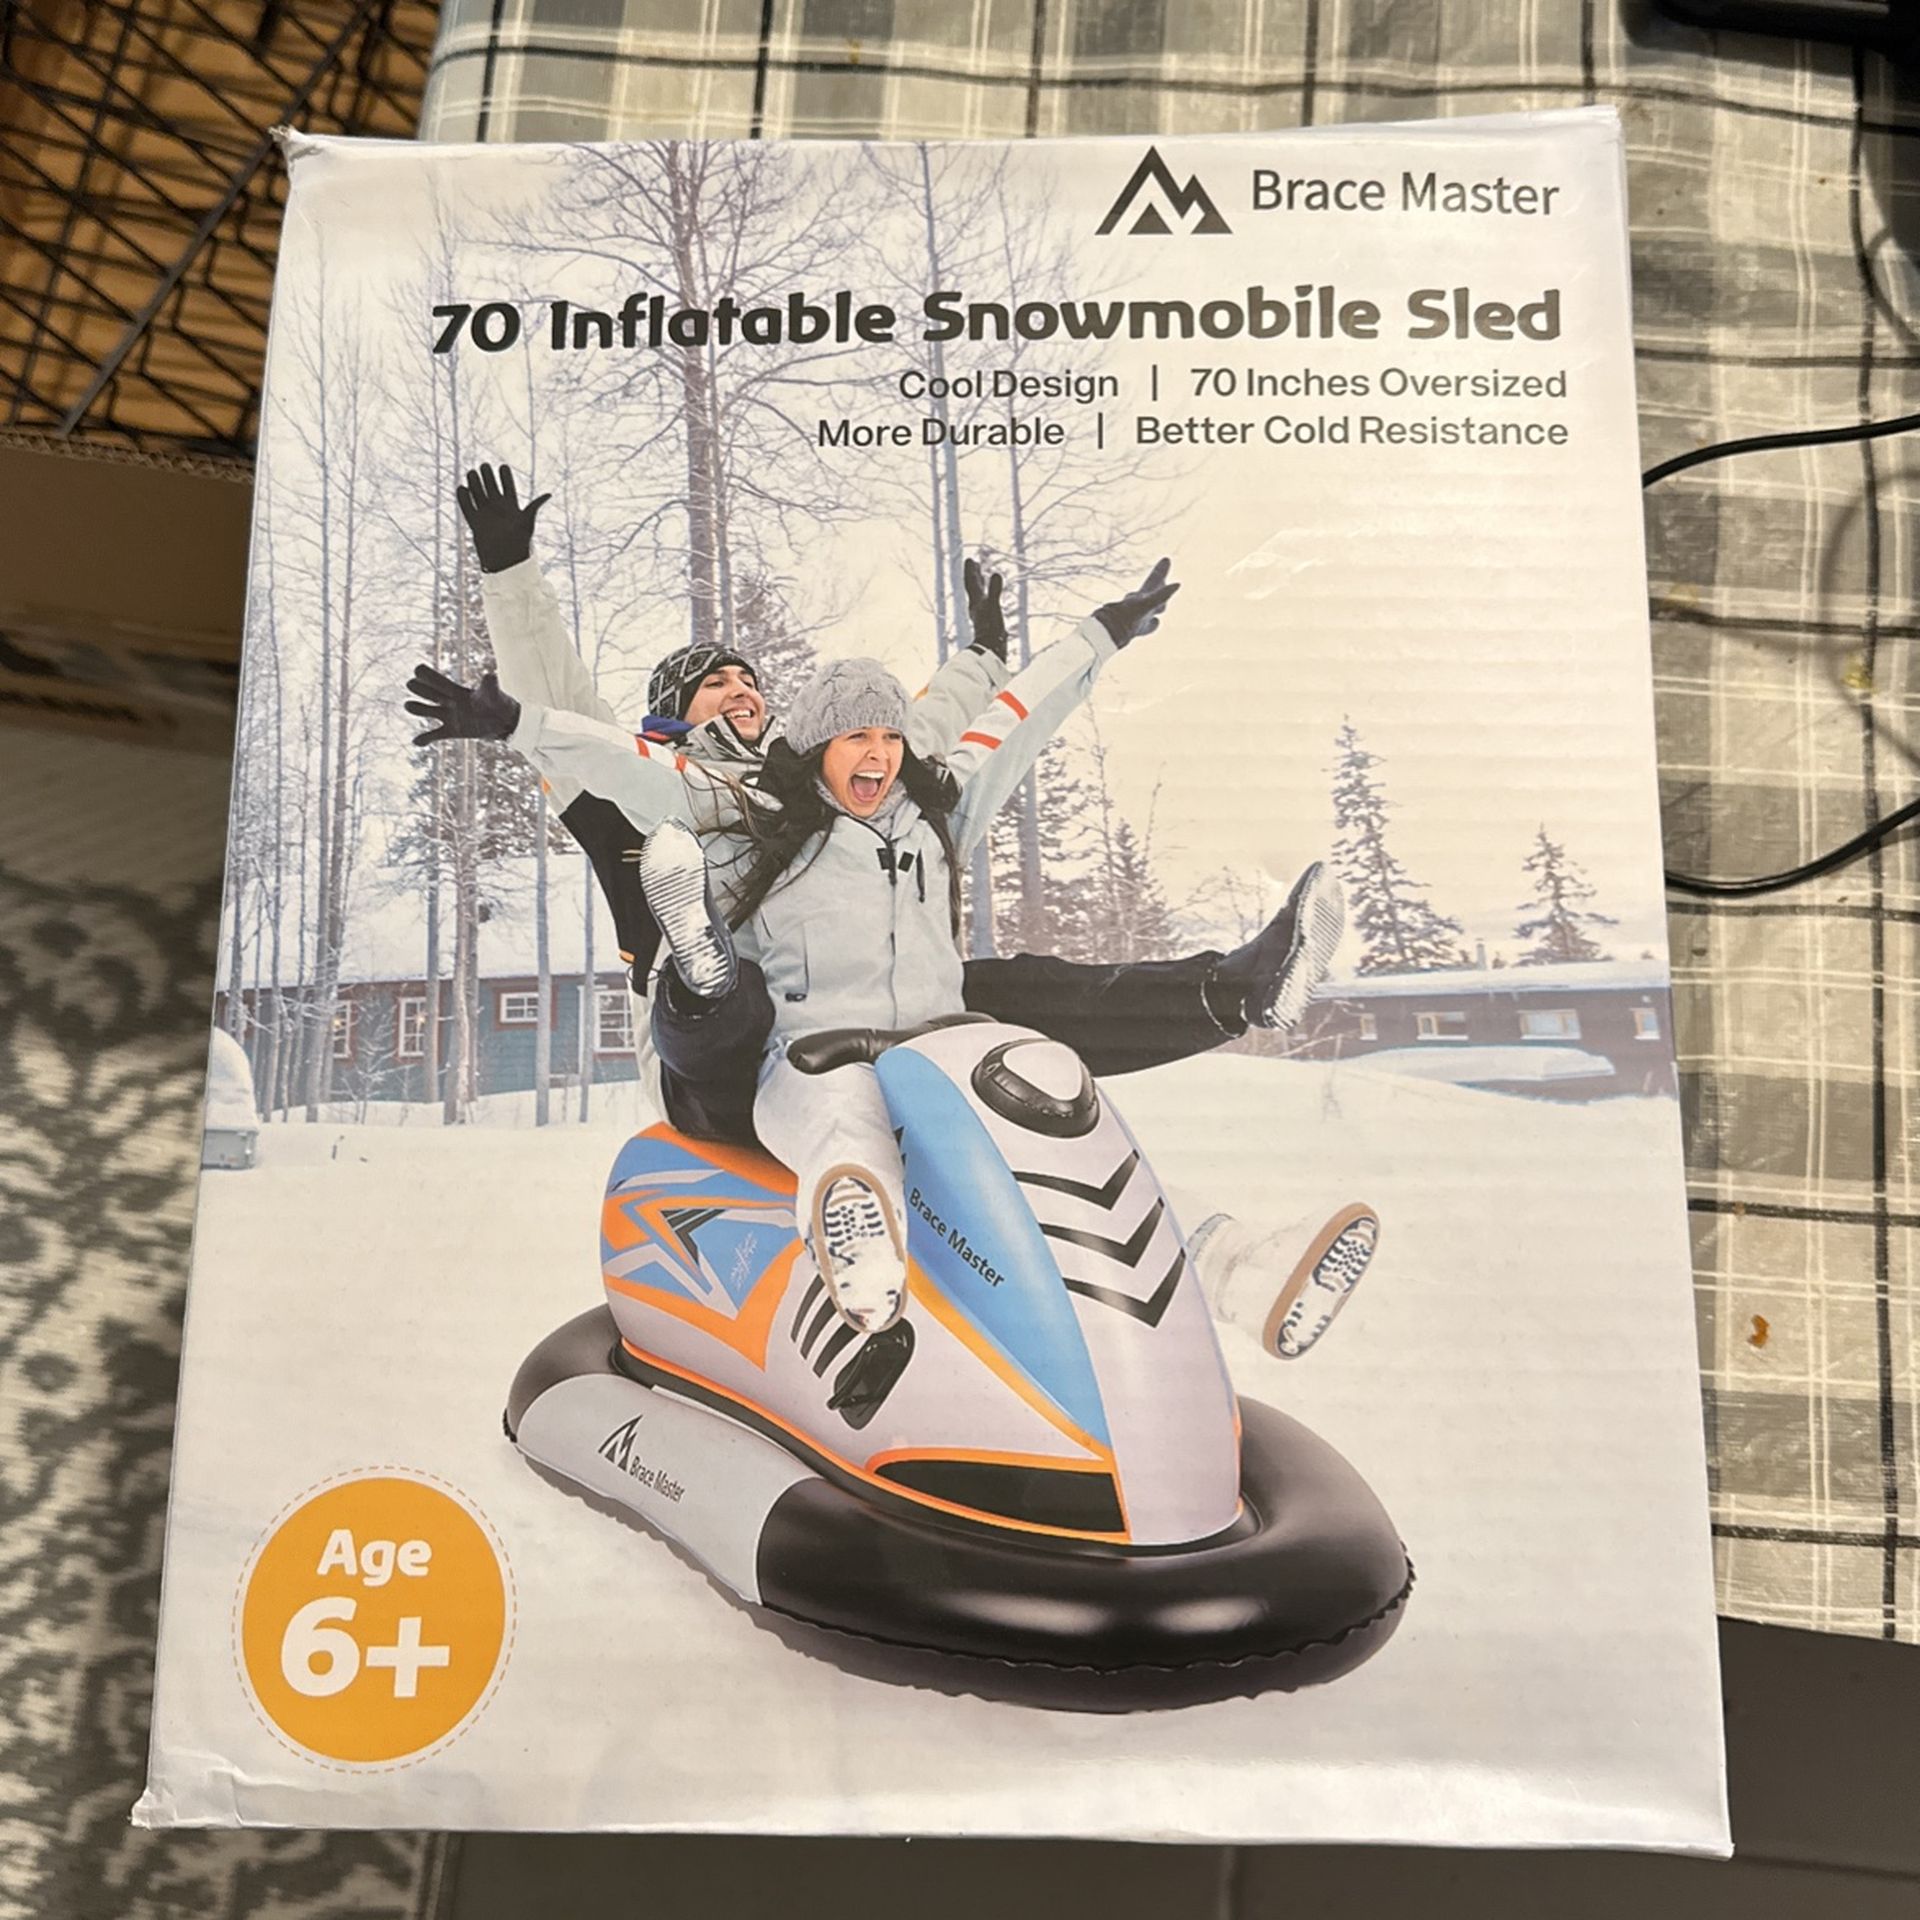 70 Inflatable snowmobile sled